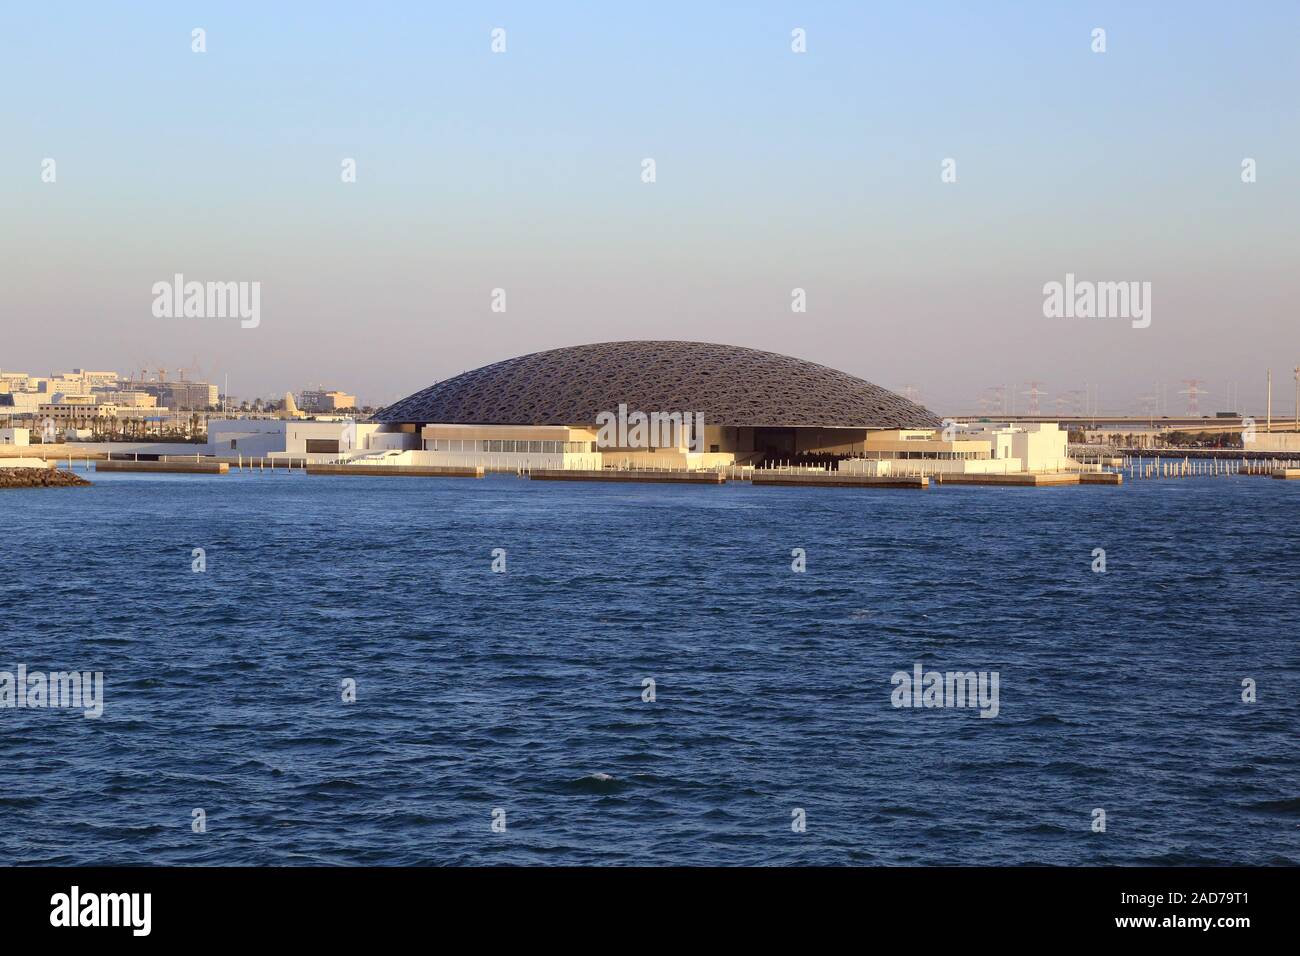 Louvre Abu Dhabi, modern art museum with domed roof at the Persian Gulf Stock Photo